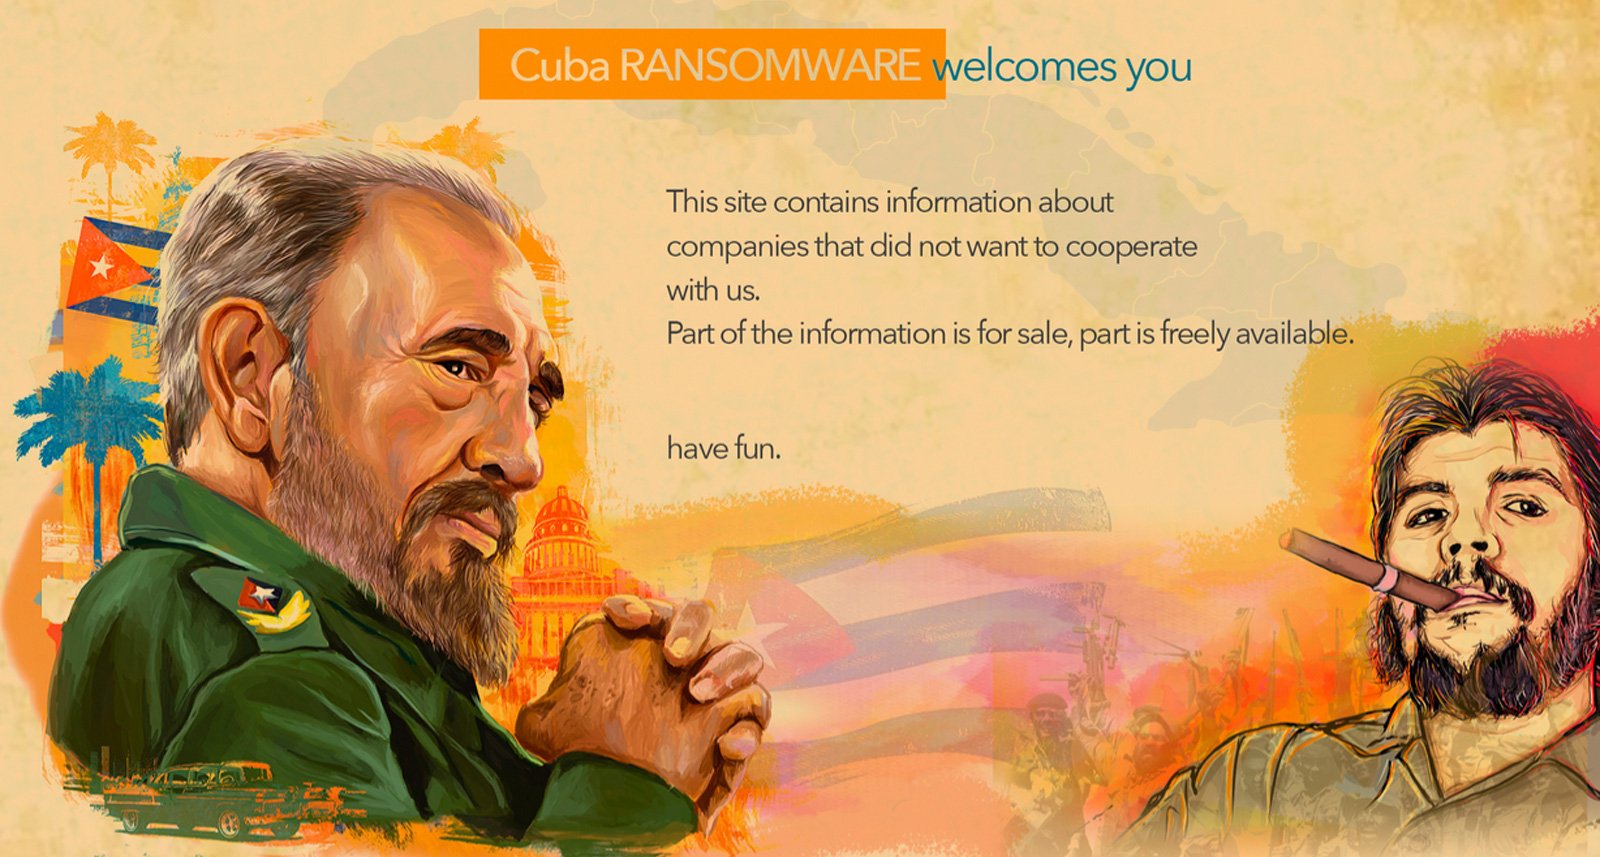 Microsoft Exchange servers hacked to deploy Cuba ransomware